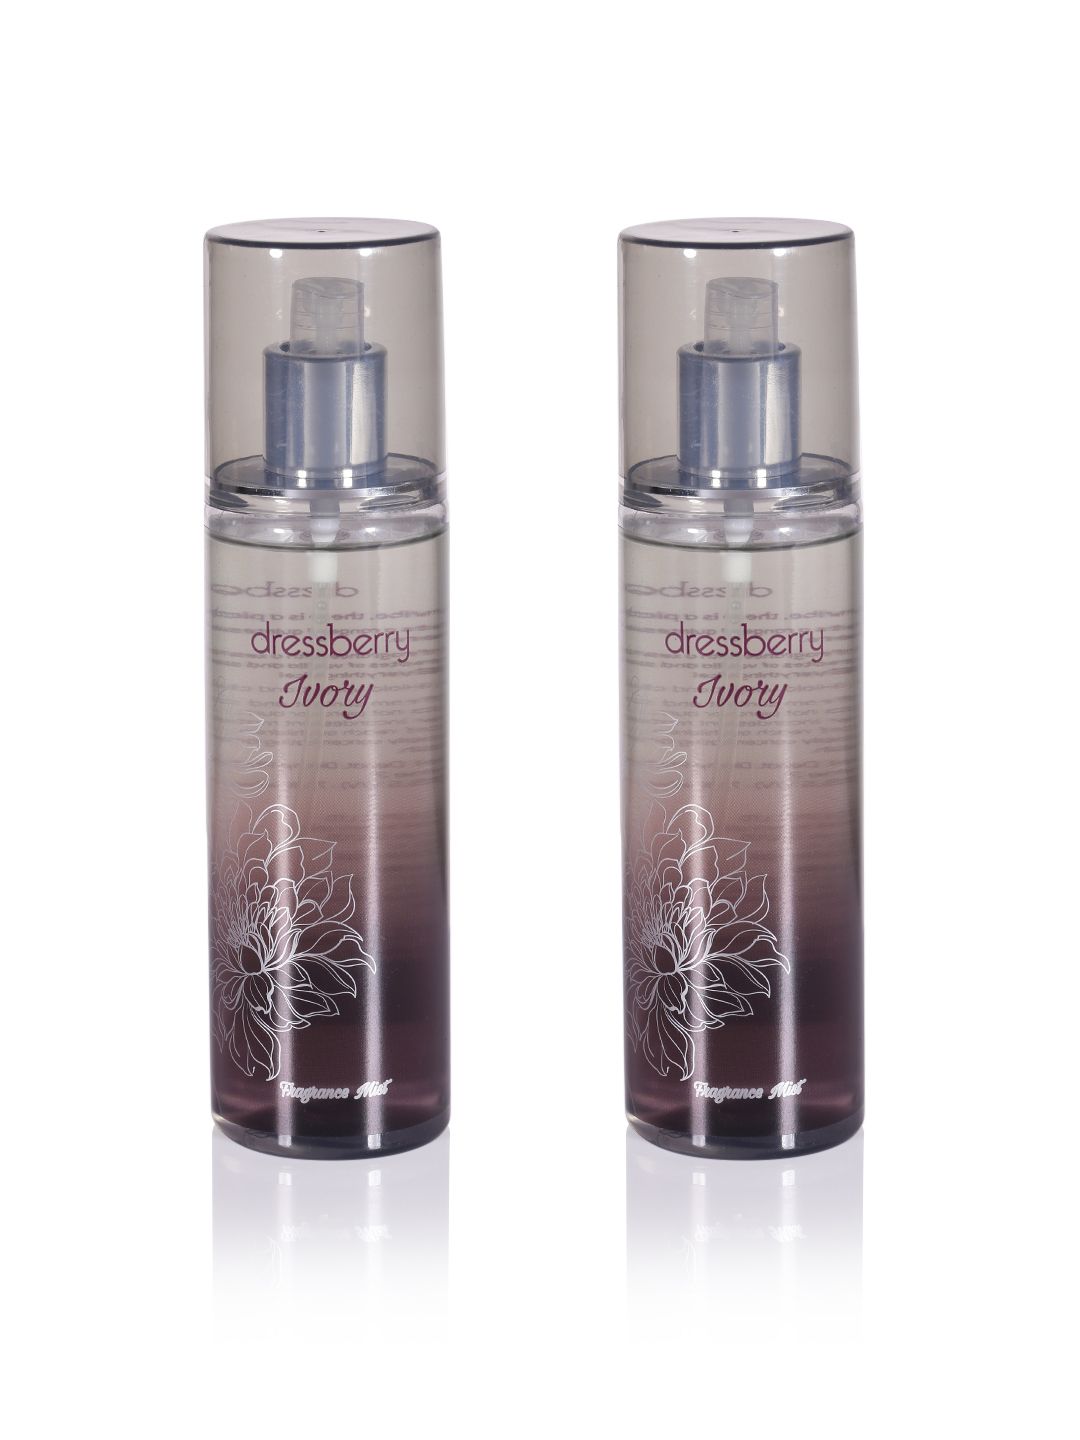 DressBerry Set of 2 Ivory Body Mists Price in India